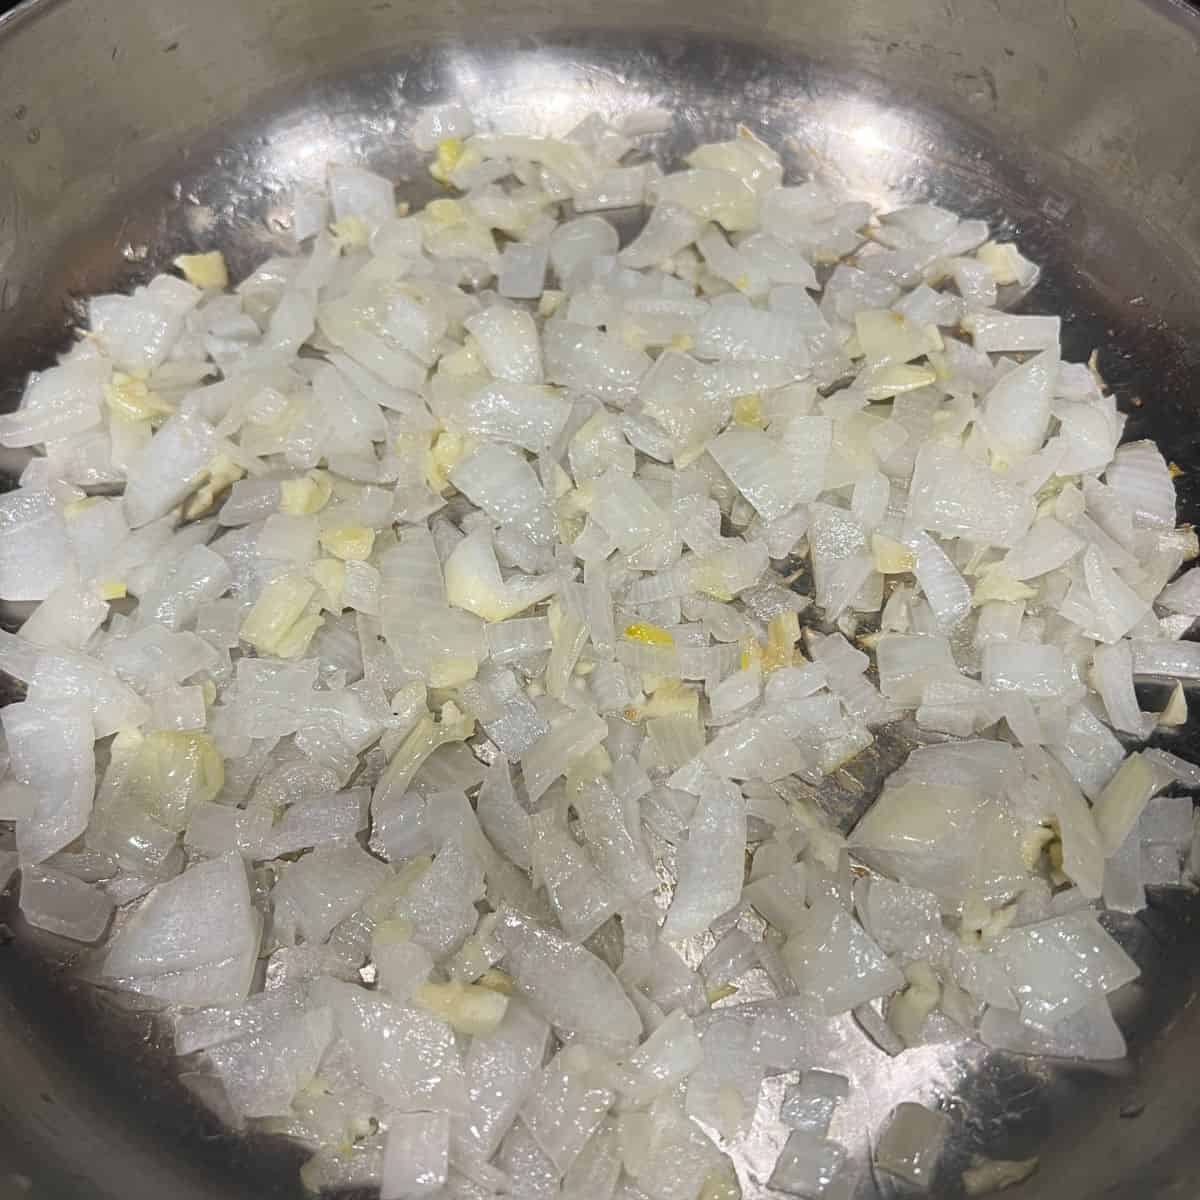 Cooking onion and garlic until soft.